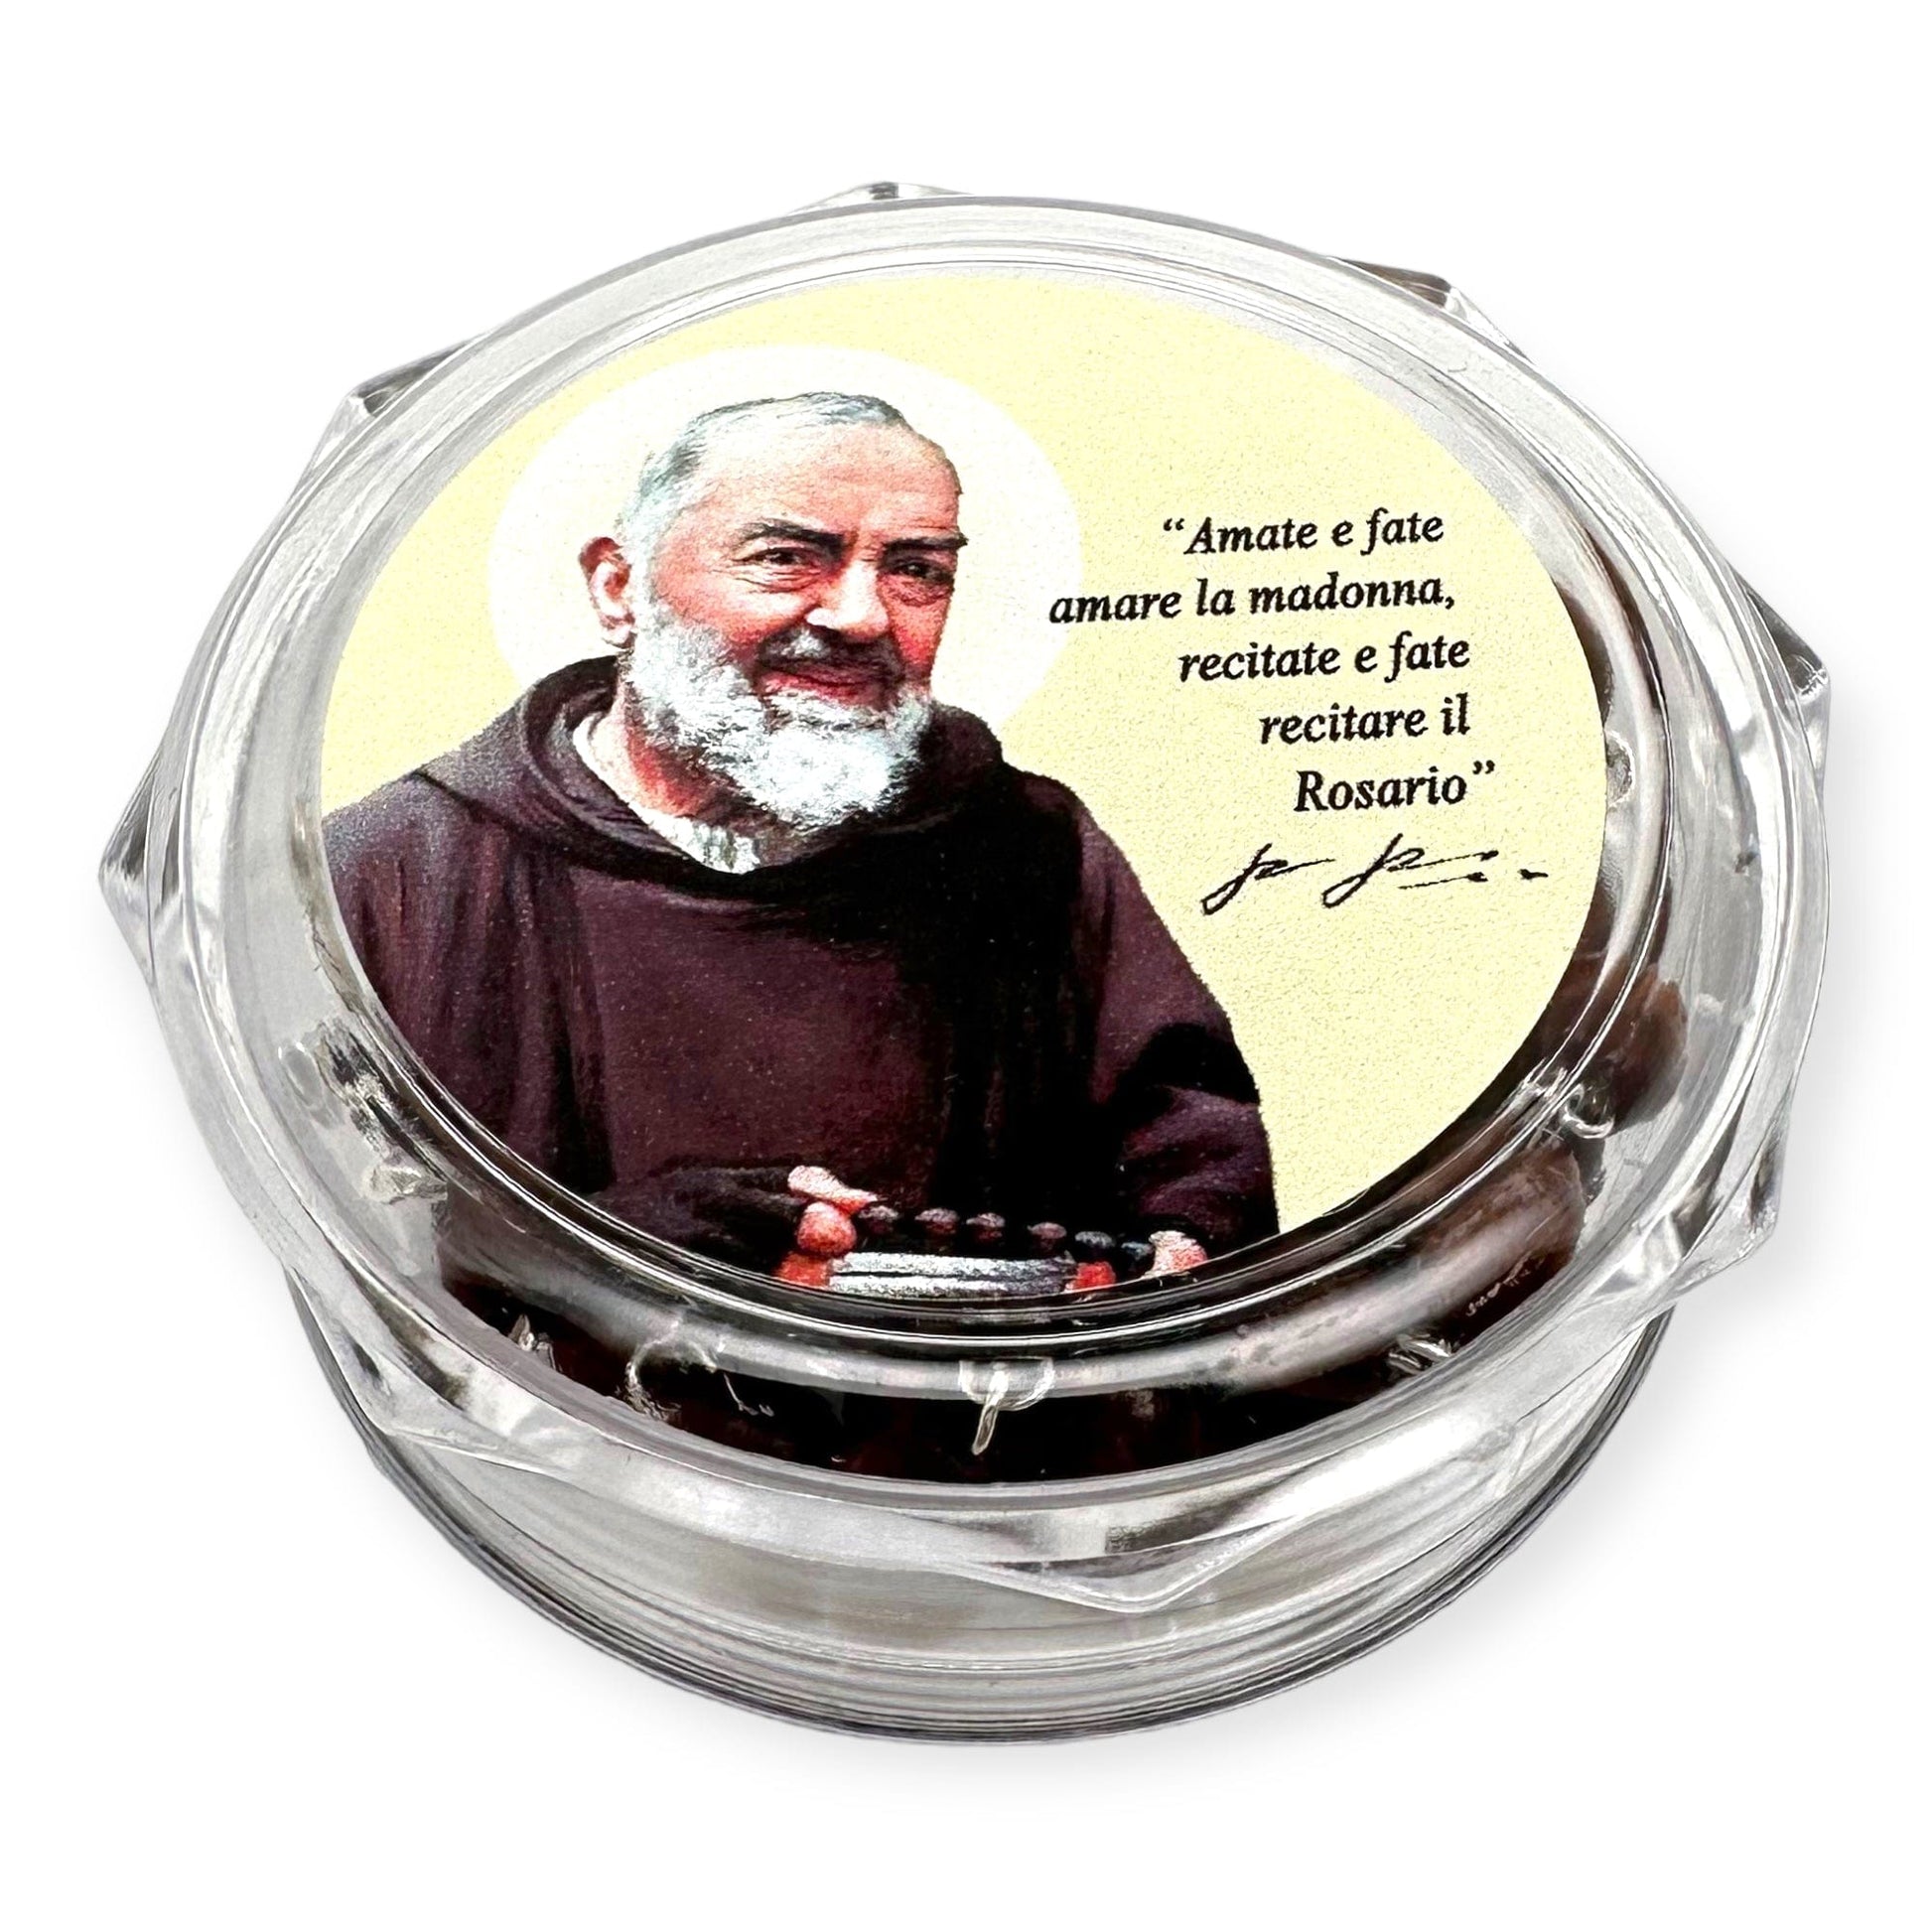 Catholically Rosaries Saint Padre Pio Rosary Blessed By Pope w/ 2nd Class Relic - St. Father Pio